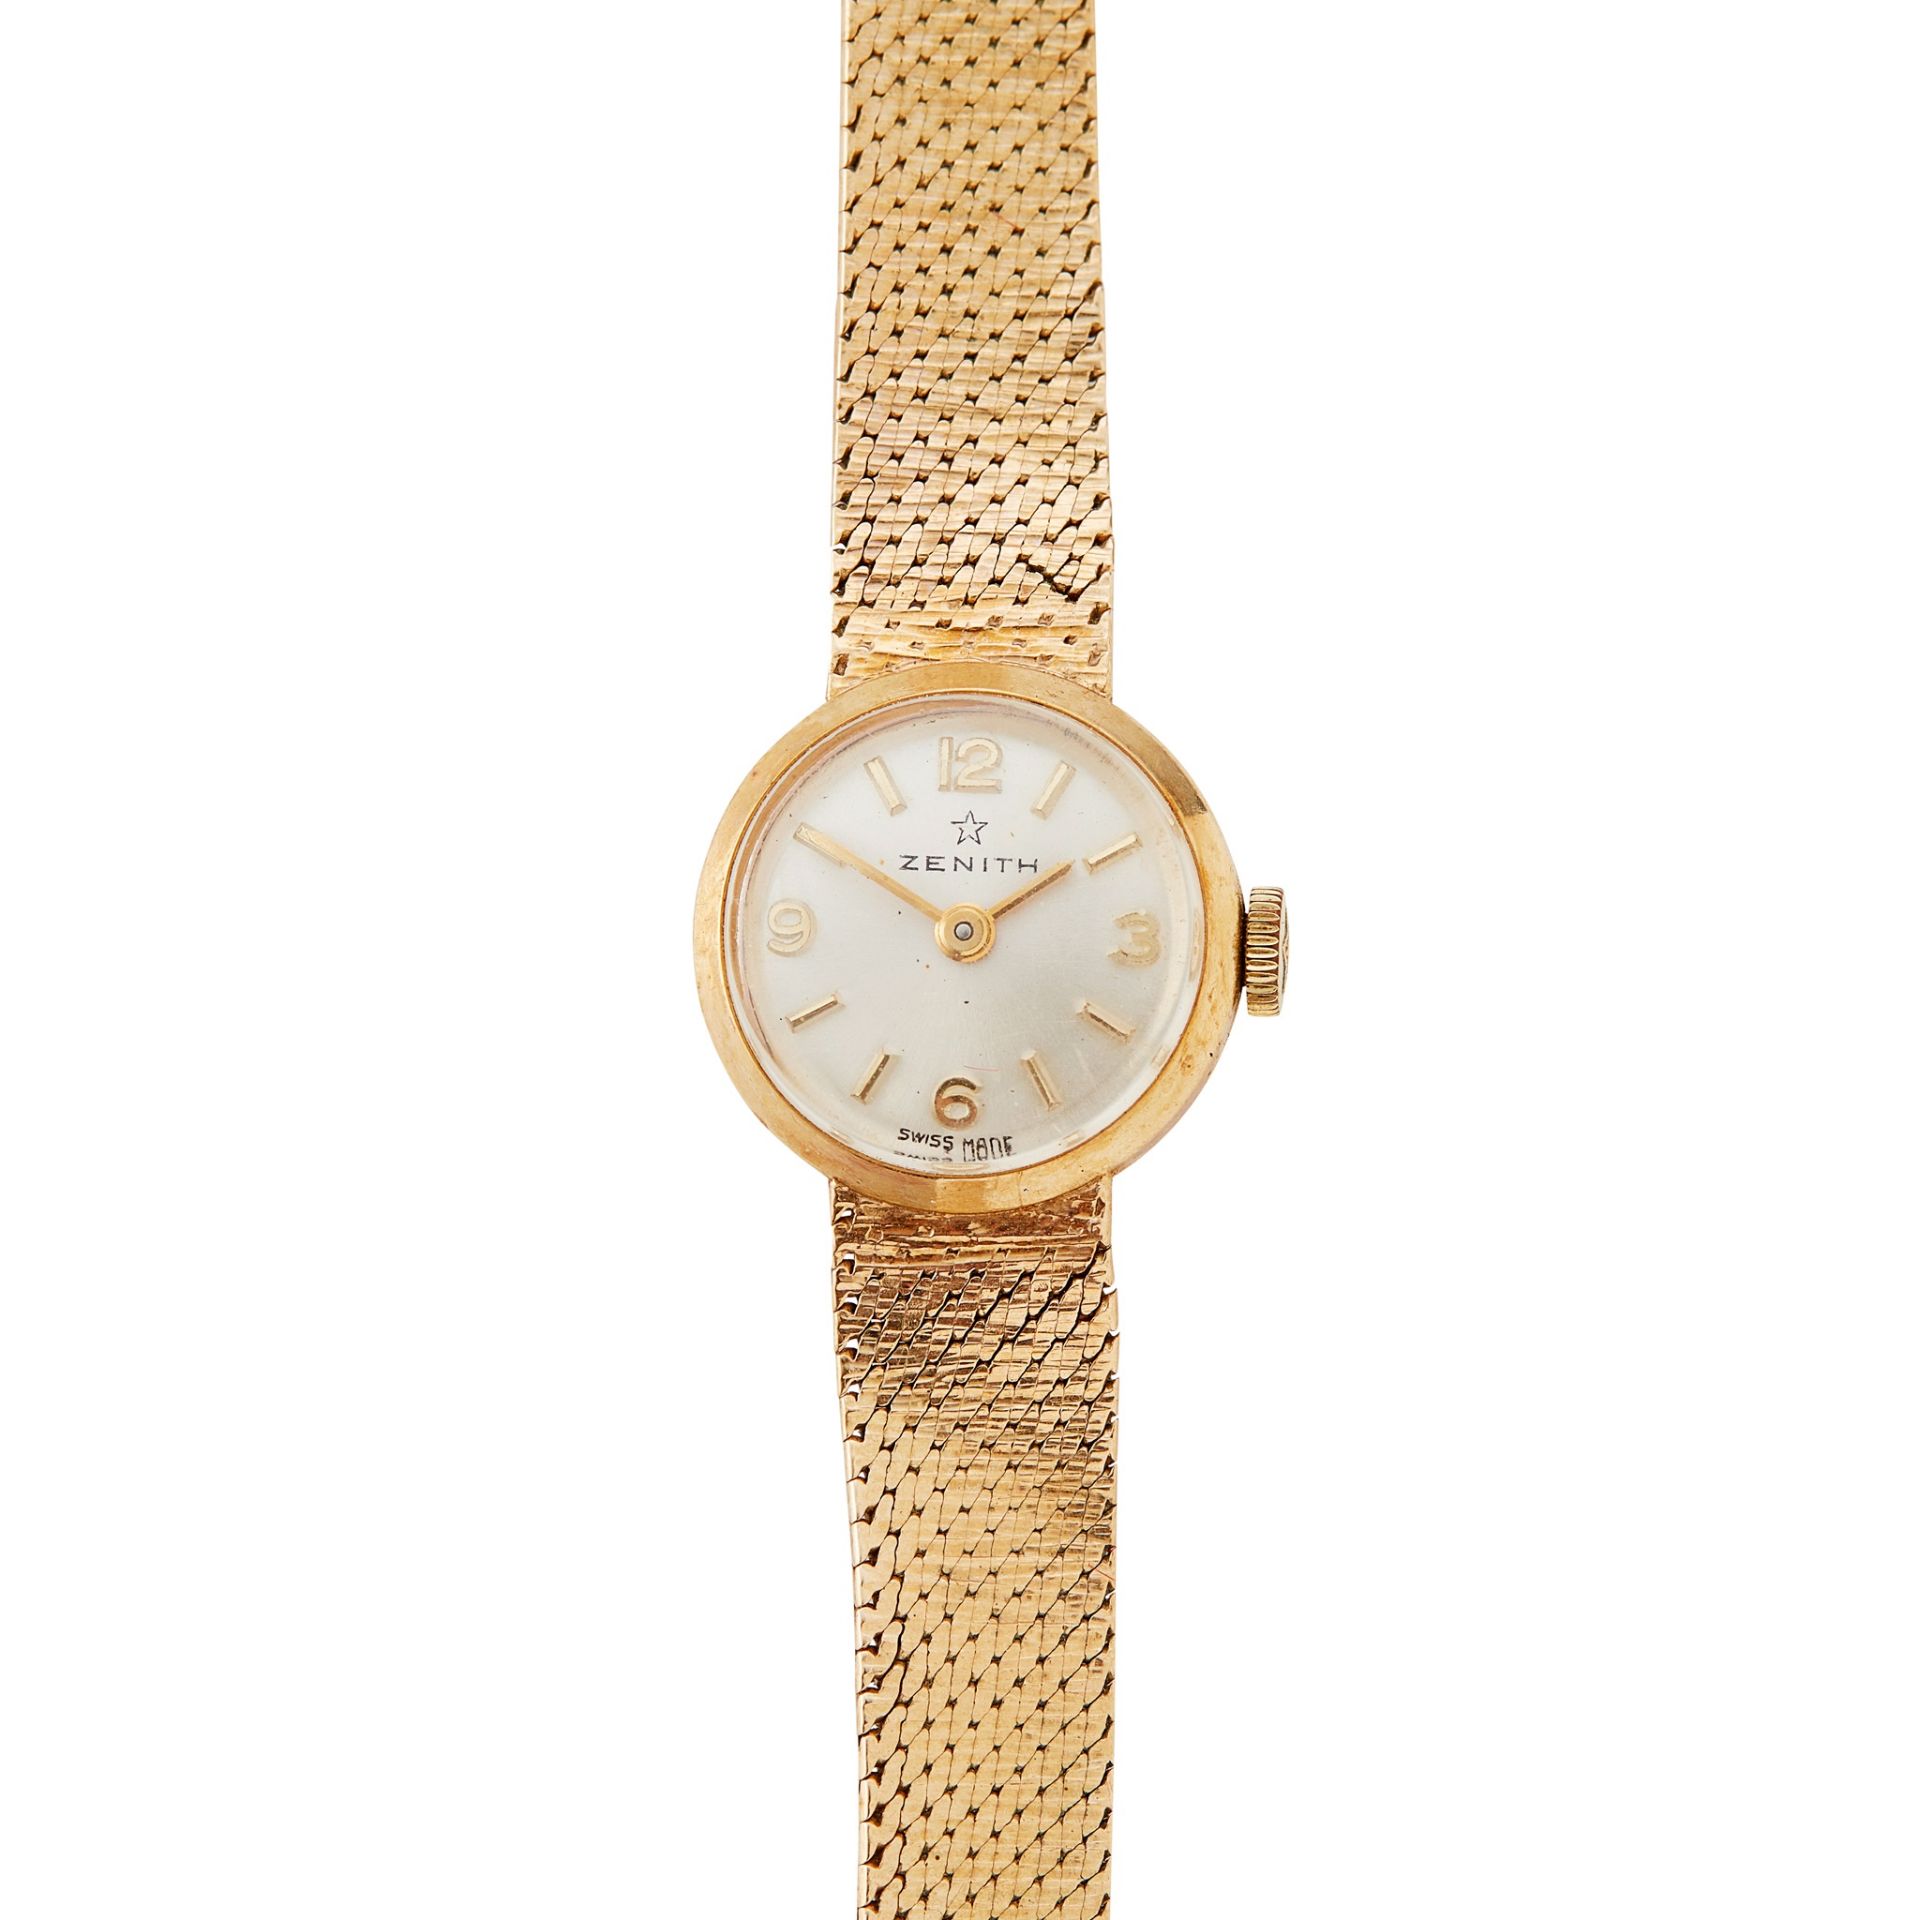 Zenith: A lady's gold watch